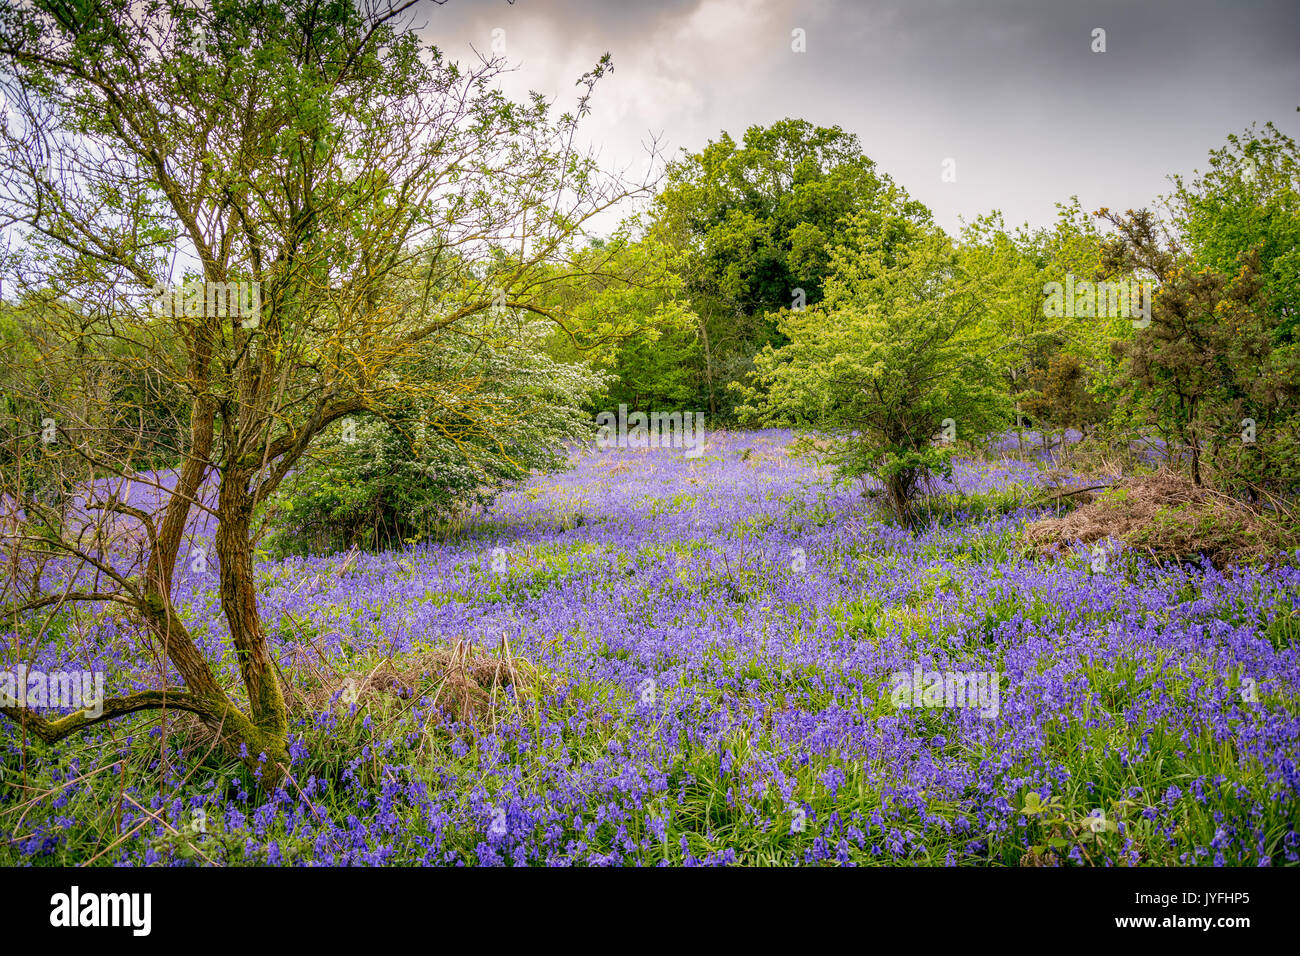 Dark rain clouds hang over a field with a carpet of bluebells in full bloom in Woodbury common, England, UK Stock Photo